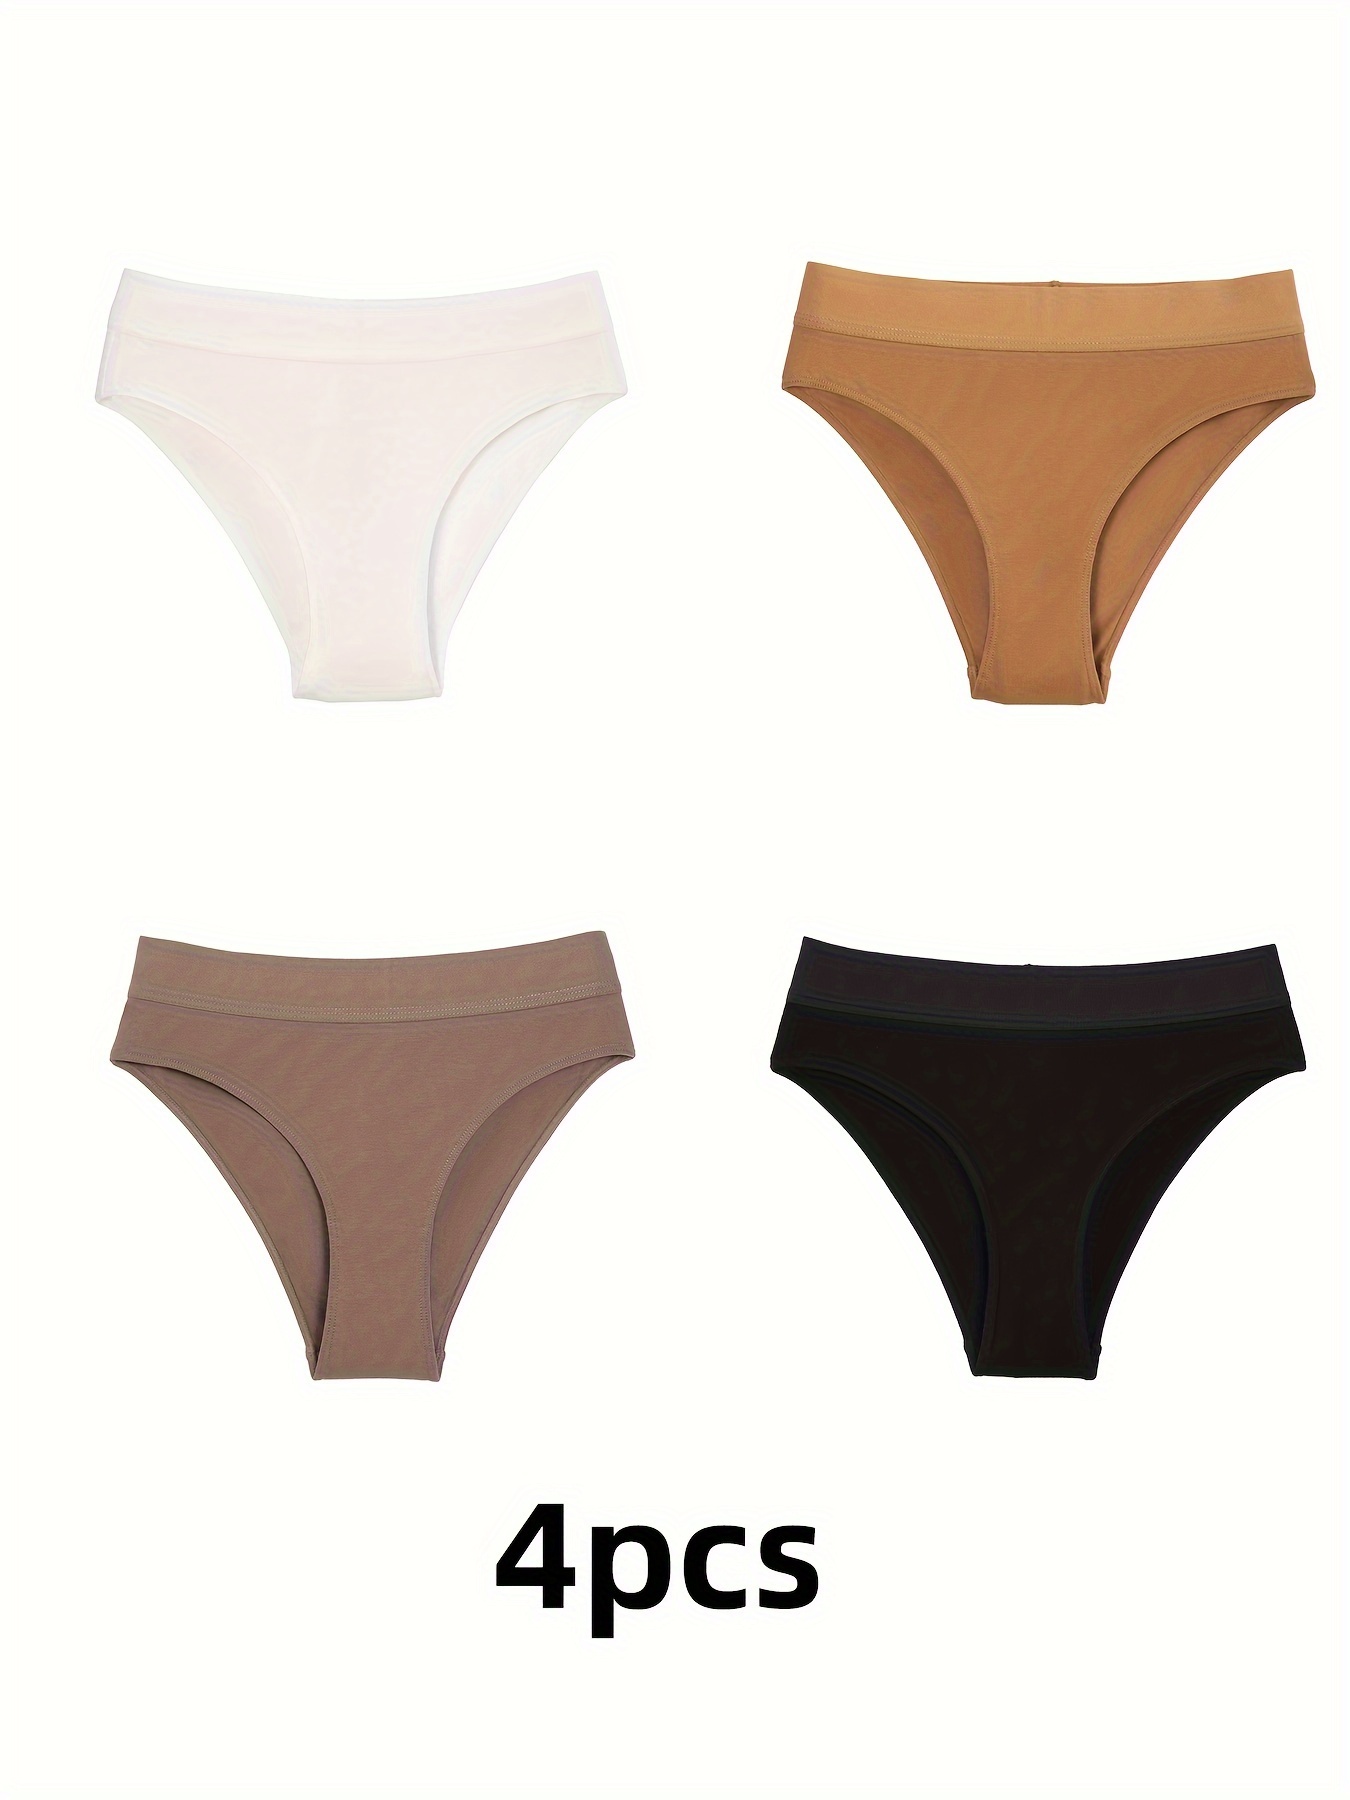 4Pcs Simple Solid Hipster Panties, Soft & Comfy Stretchy Intimates Panties,  Women's Lingerie & Underwear